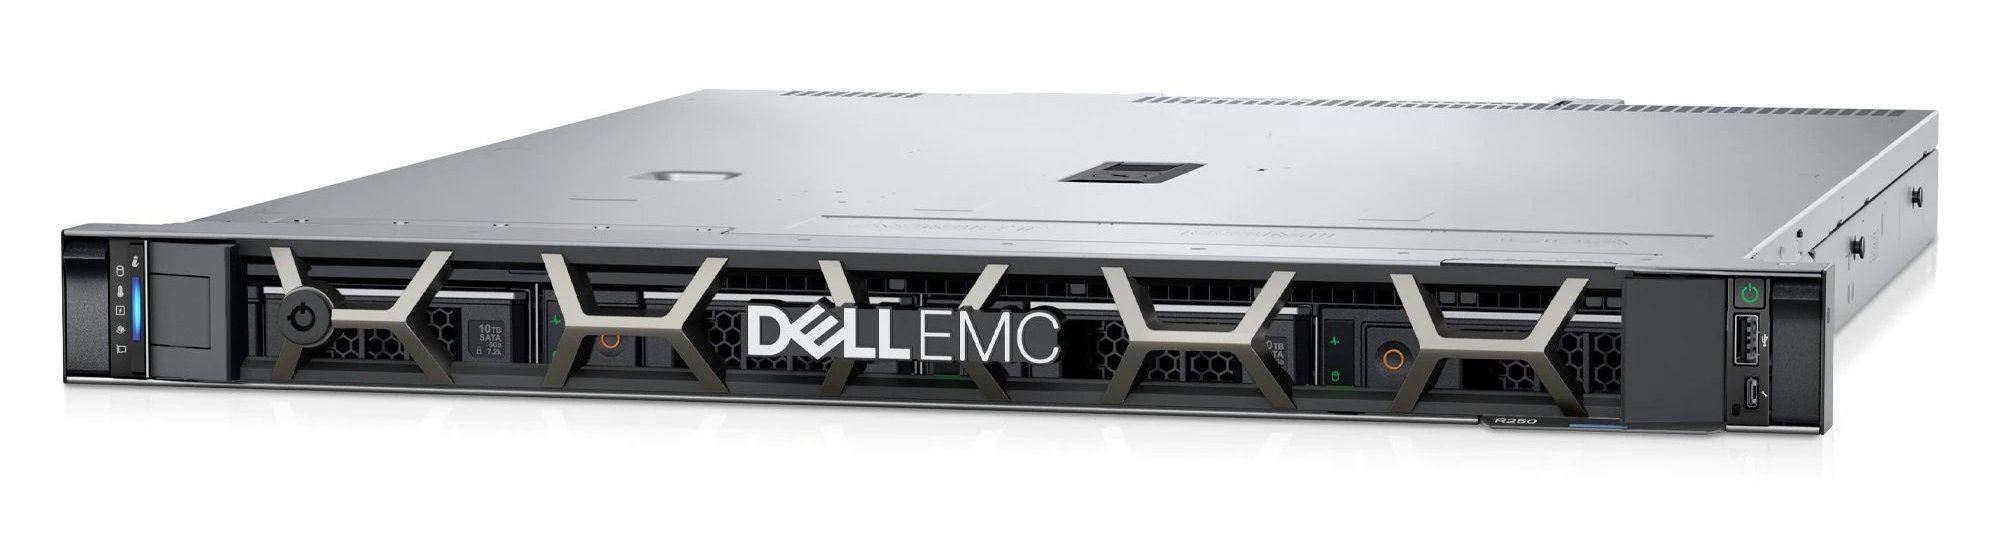 PowerEdge R250 Rack Server Intel Xeon E-2314 2.8GHz, 8M Cache, 4C/4T, Turbo (65W), 3200 MT/s, 16GB UDIMM, 3200MT/s, ECC, 480GB SSD SATA Read Intensive 6Gbps 512 2.5in Hot-plug AG Drive,3.5in HYB CARR, 3.5 Chassis with up to x4 Hot Plug Hard Drives, Motherboard with Broadcom 5720 Dual Port 1Gb